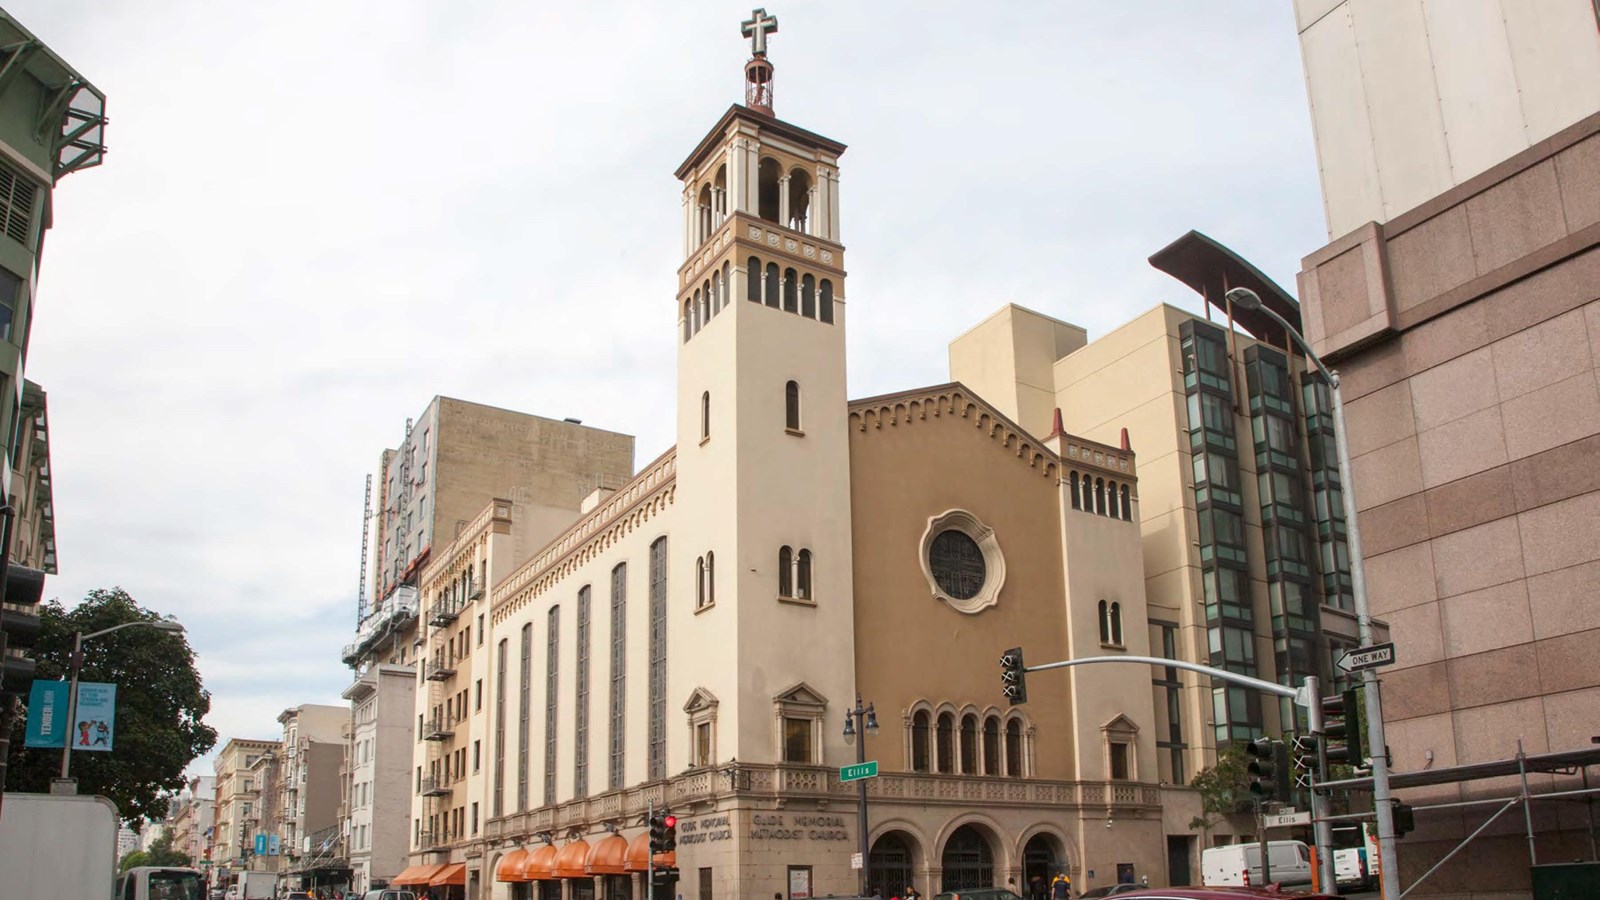 Tall, sand-colored church with a tower on a San Francisco corner